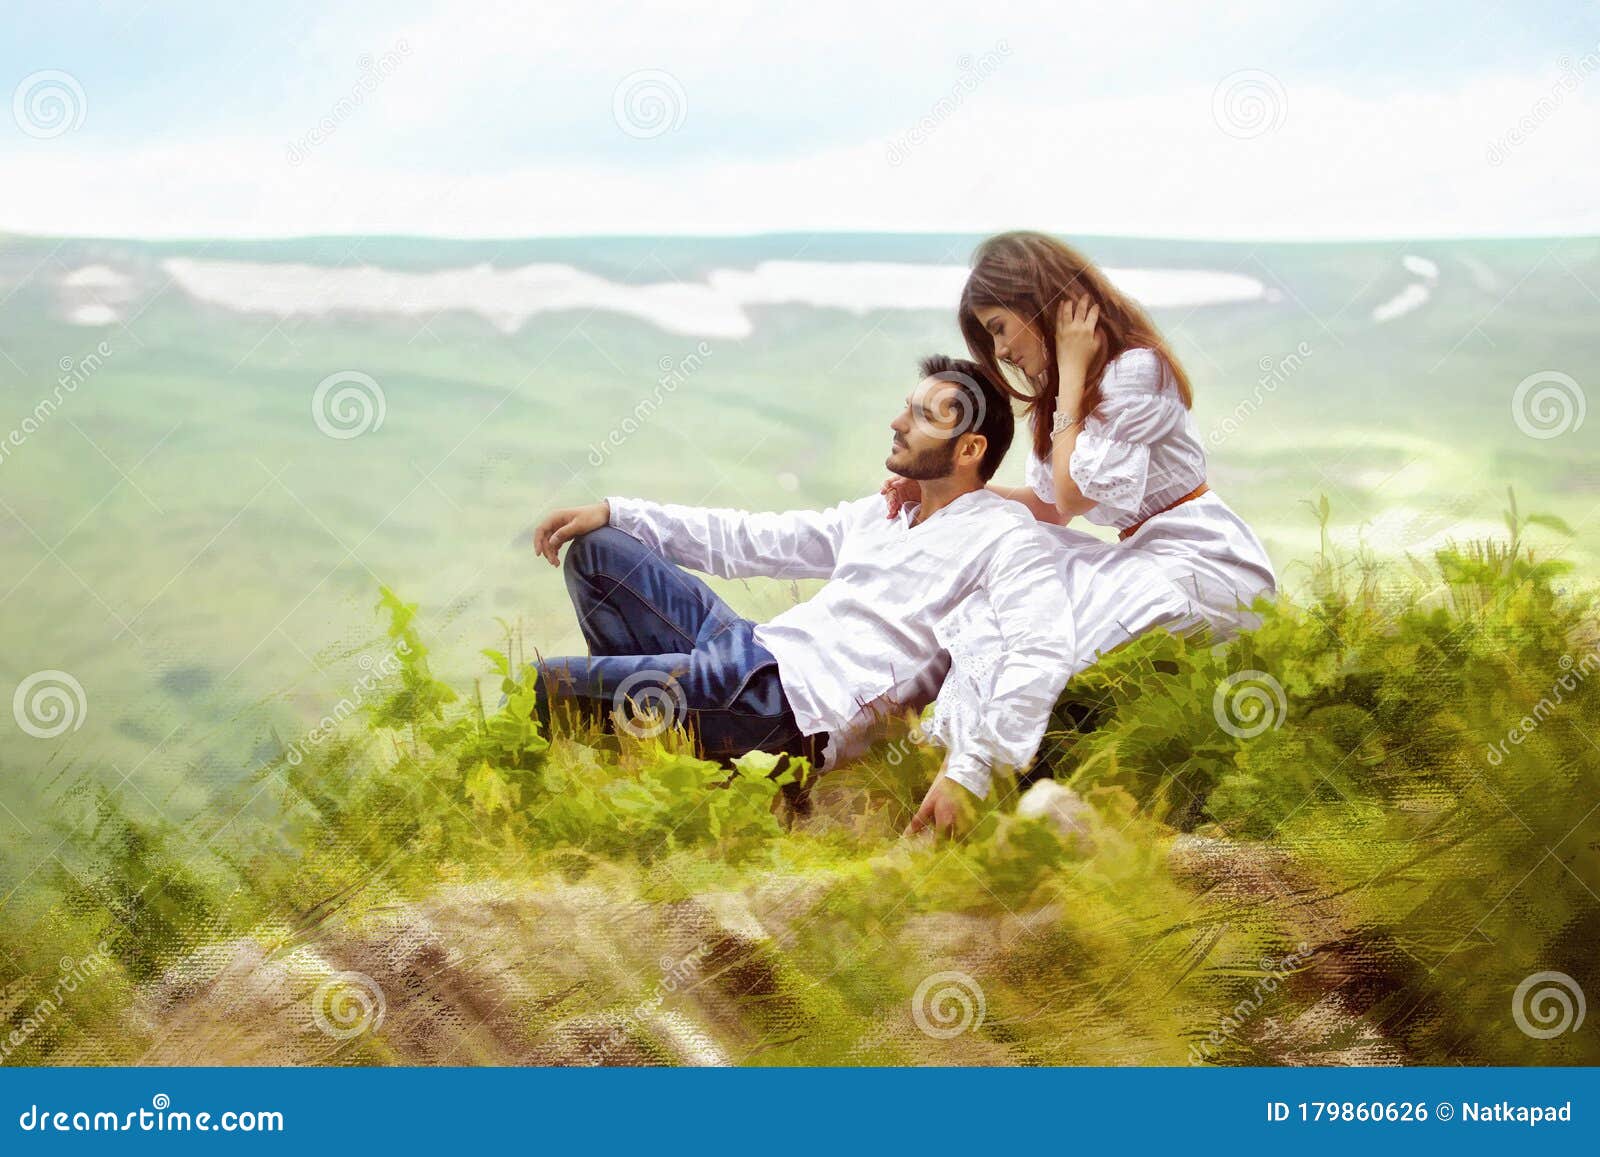 Beautiful Young Couple Man and are in Nature Stock Photo - Image of painting: 179860626